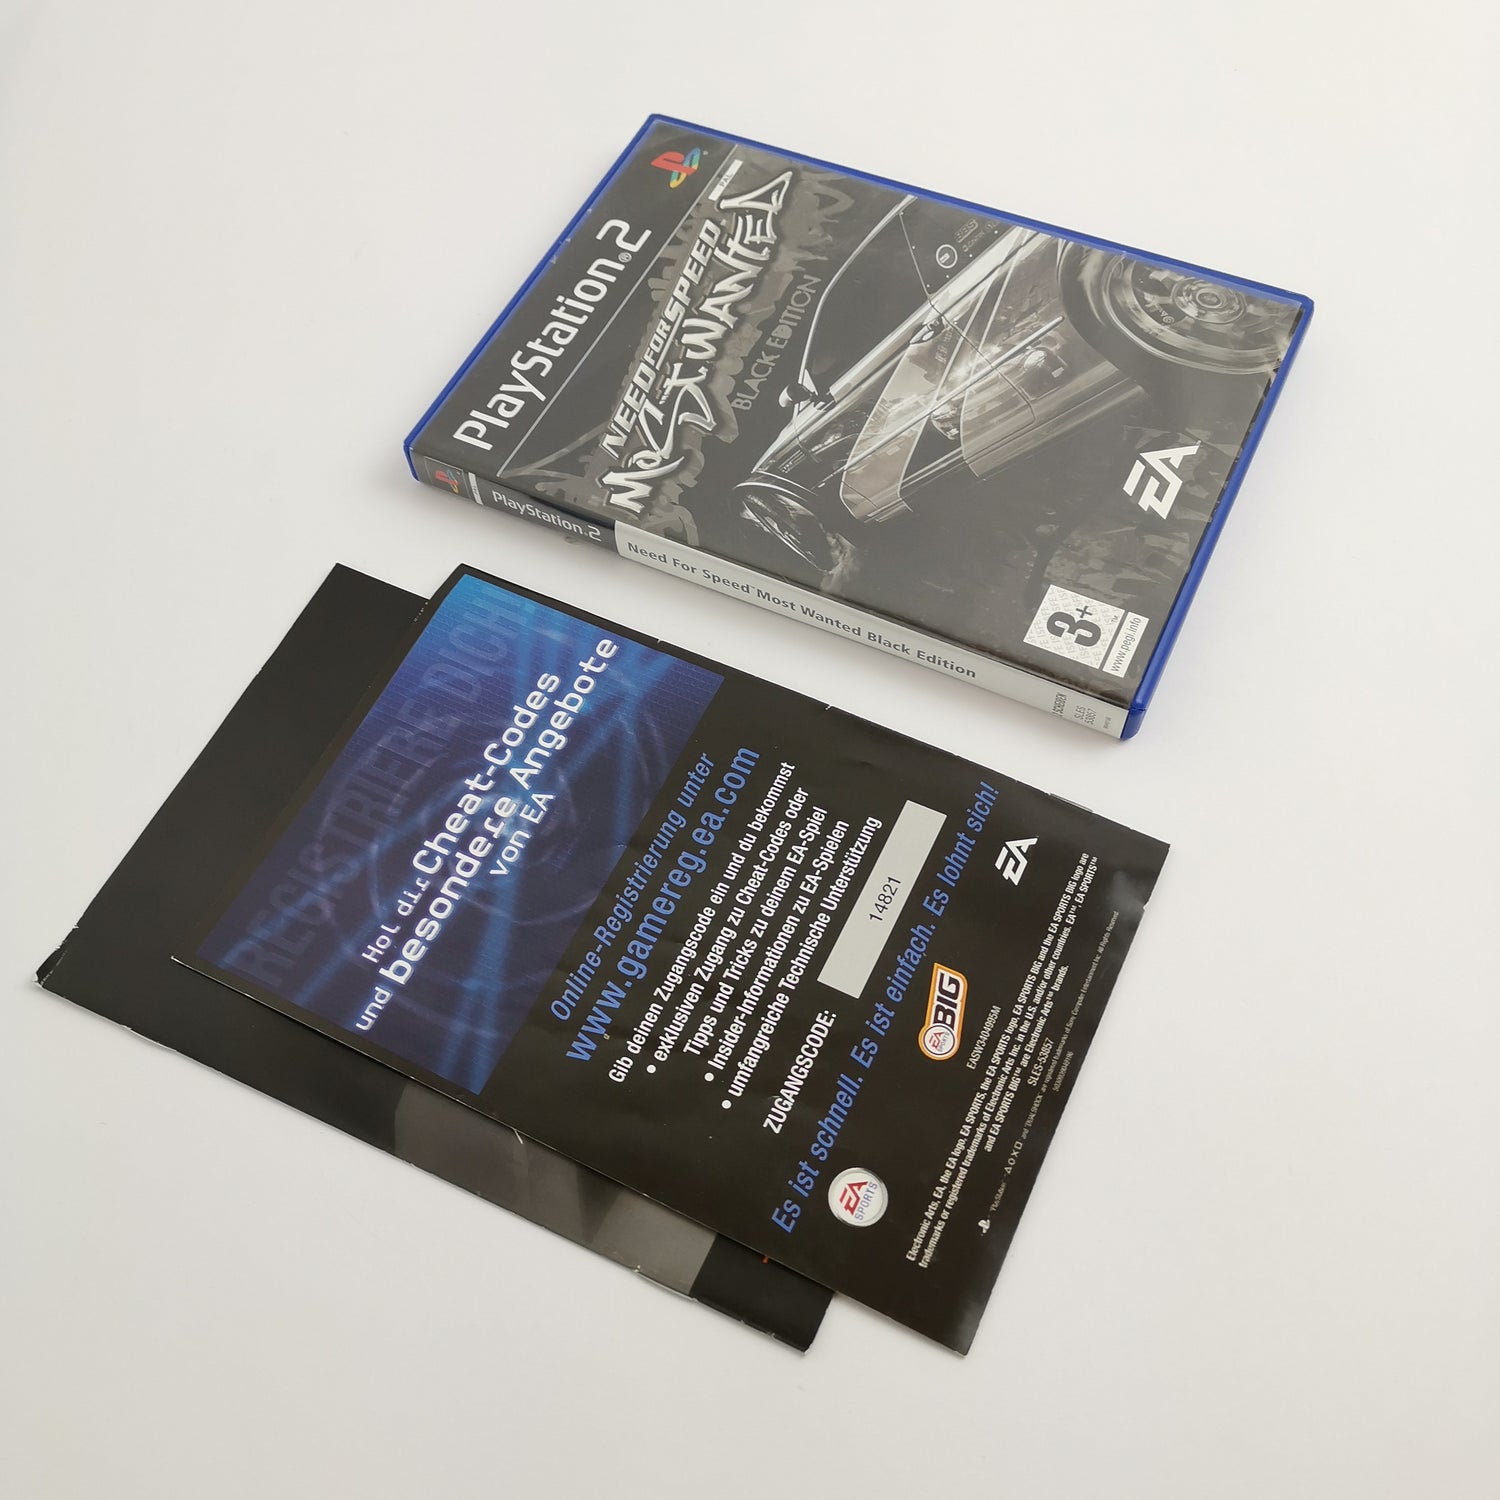 Sony Playstation 2 Game: Need for Speed ​​Most Wanted Black Edition | PS2 - original packaging